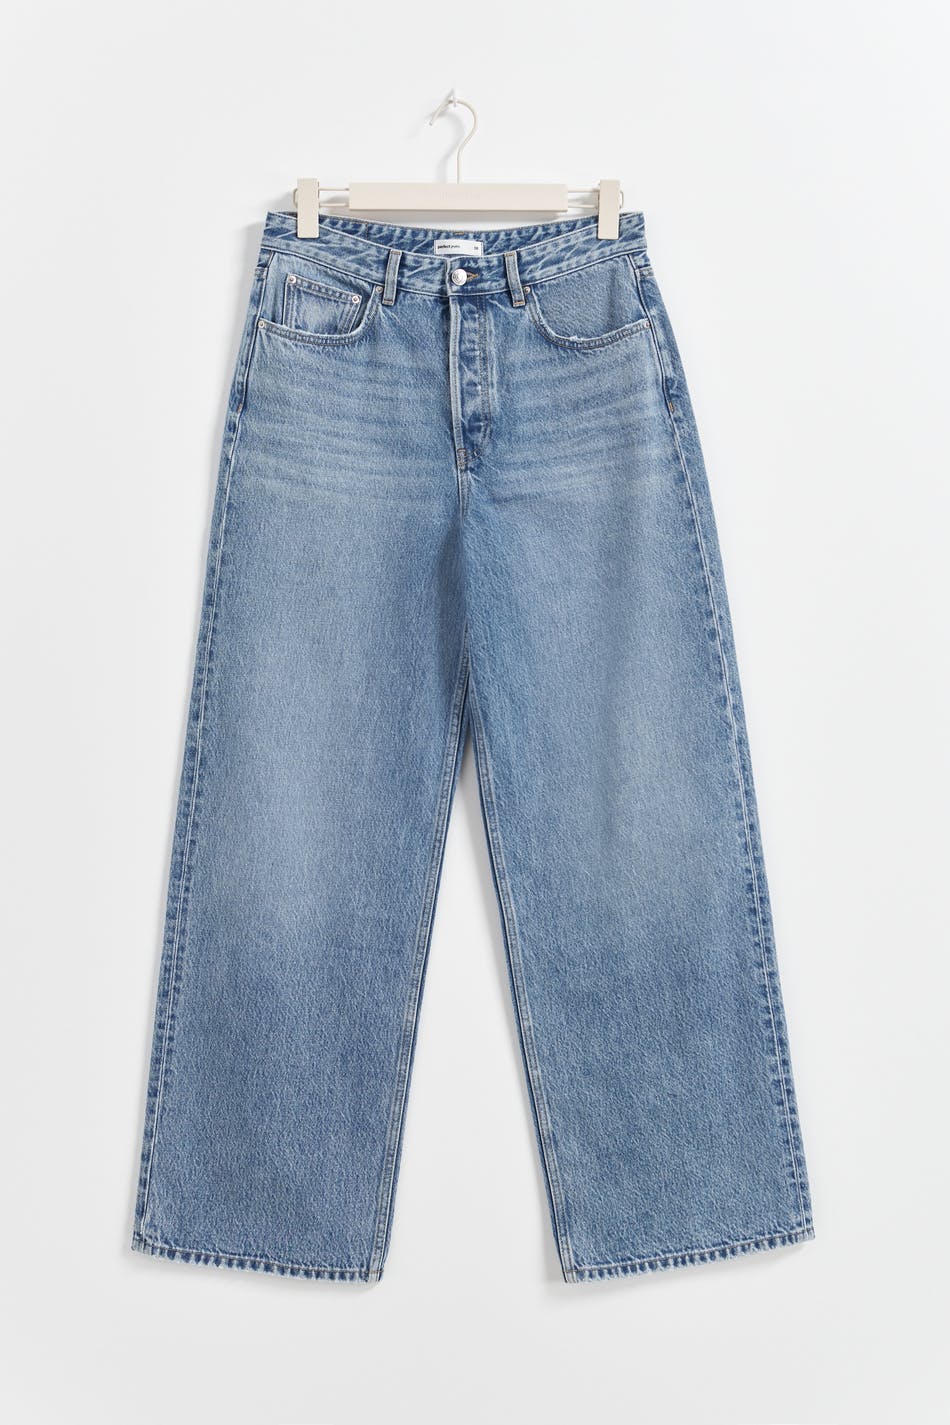 Gina Tricot - Baggy tall wide jeans - loose jeans - Blue - 42 - Female